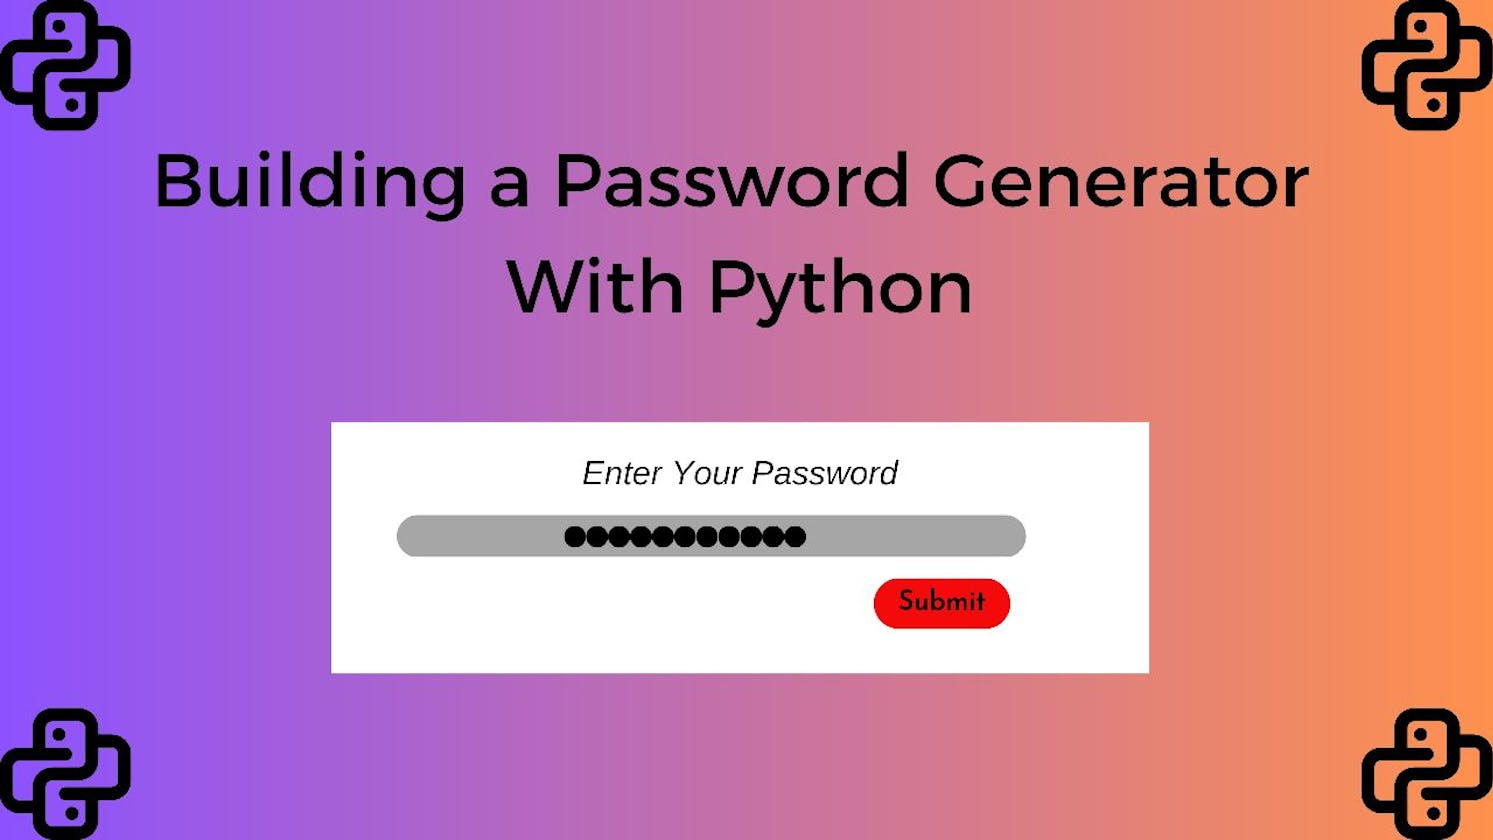 Building a Password Generator with Python